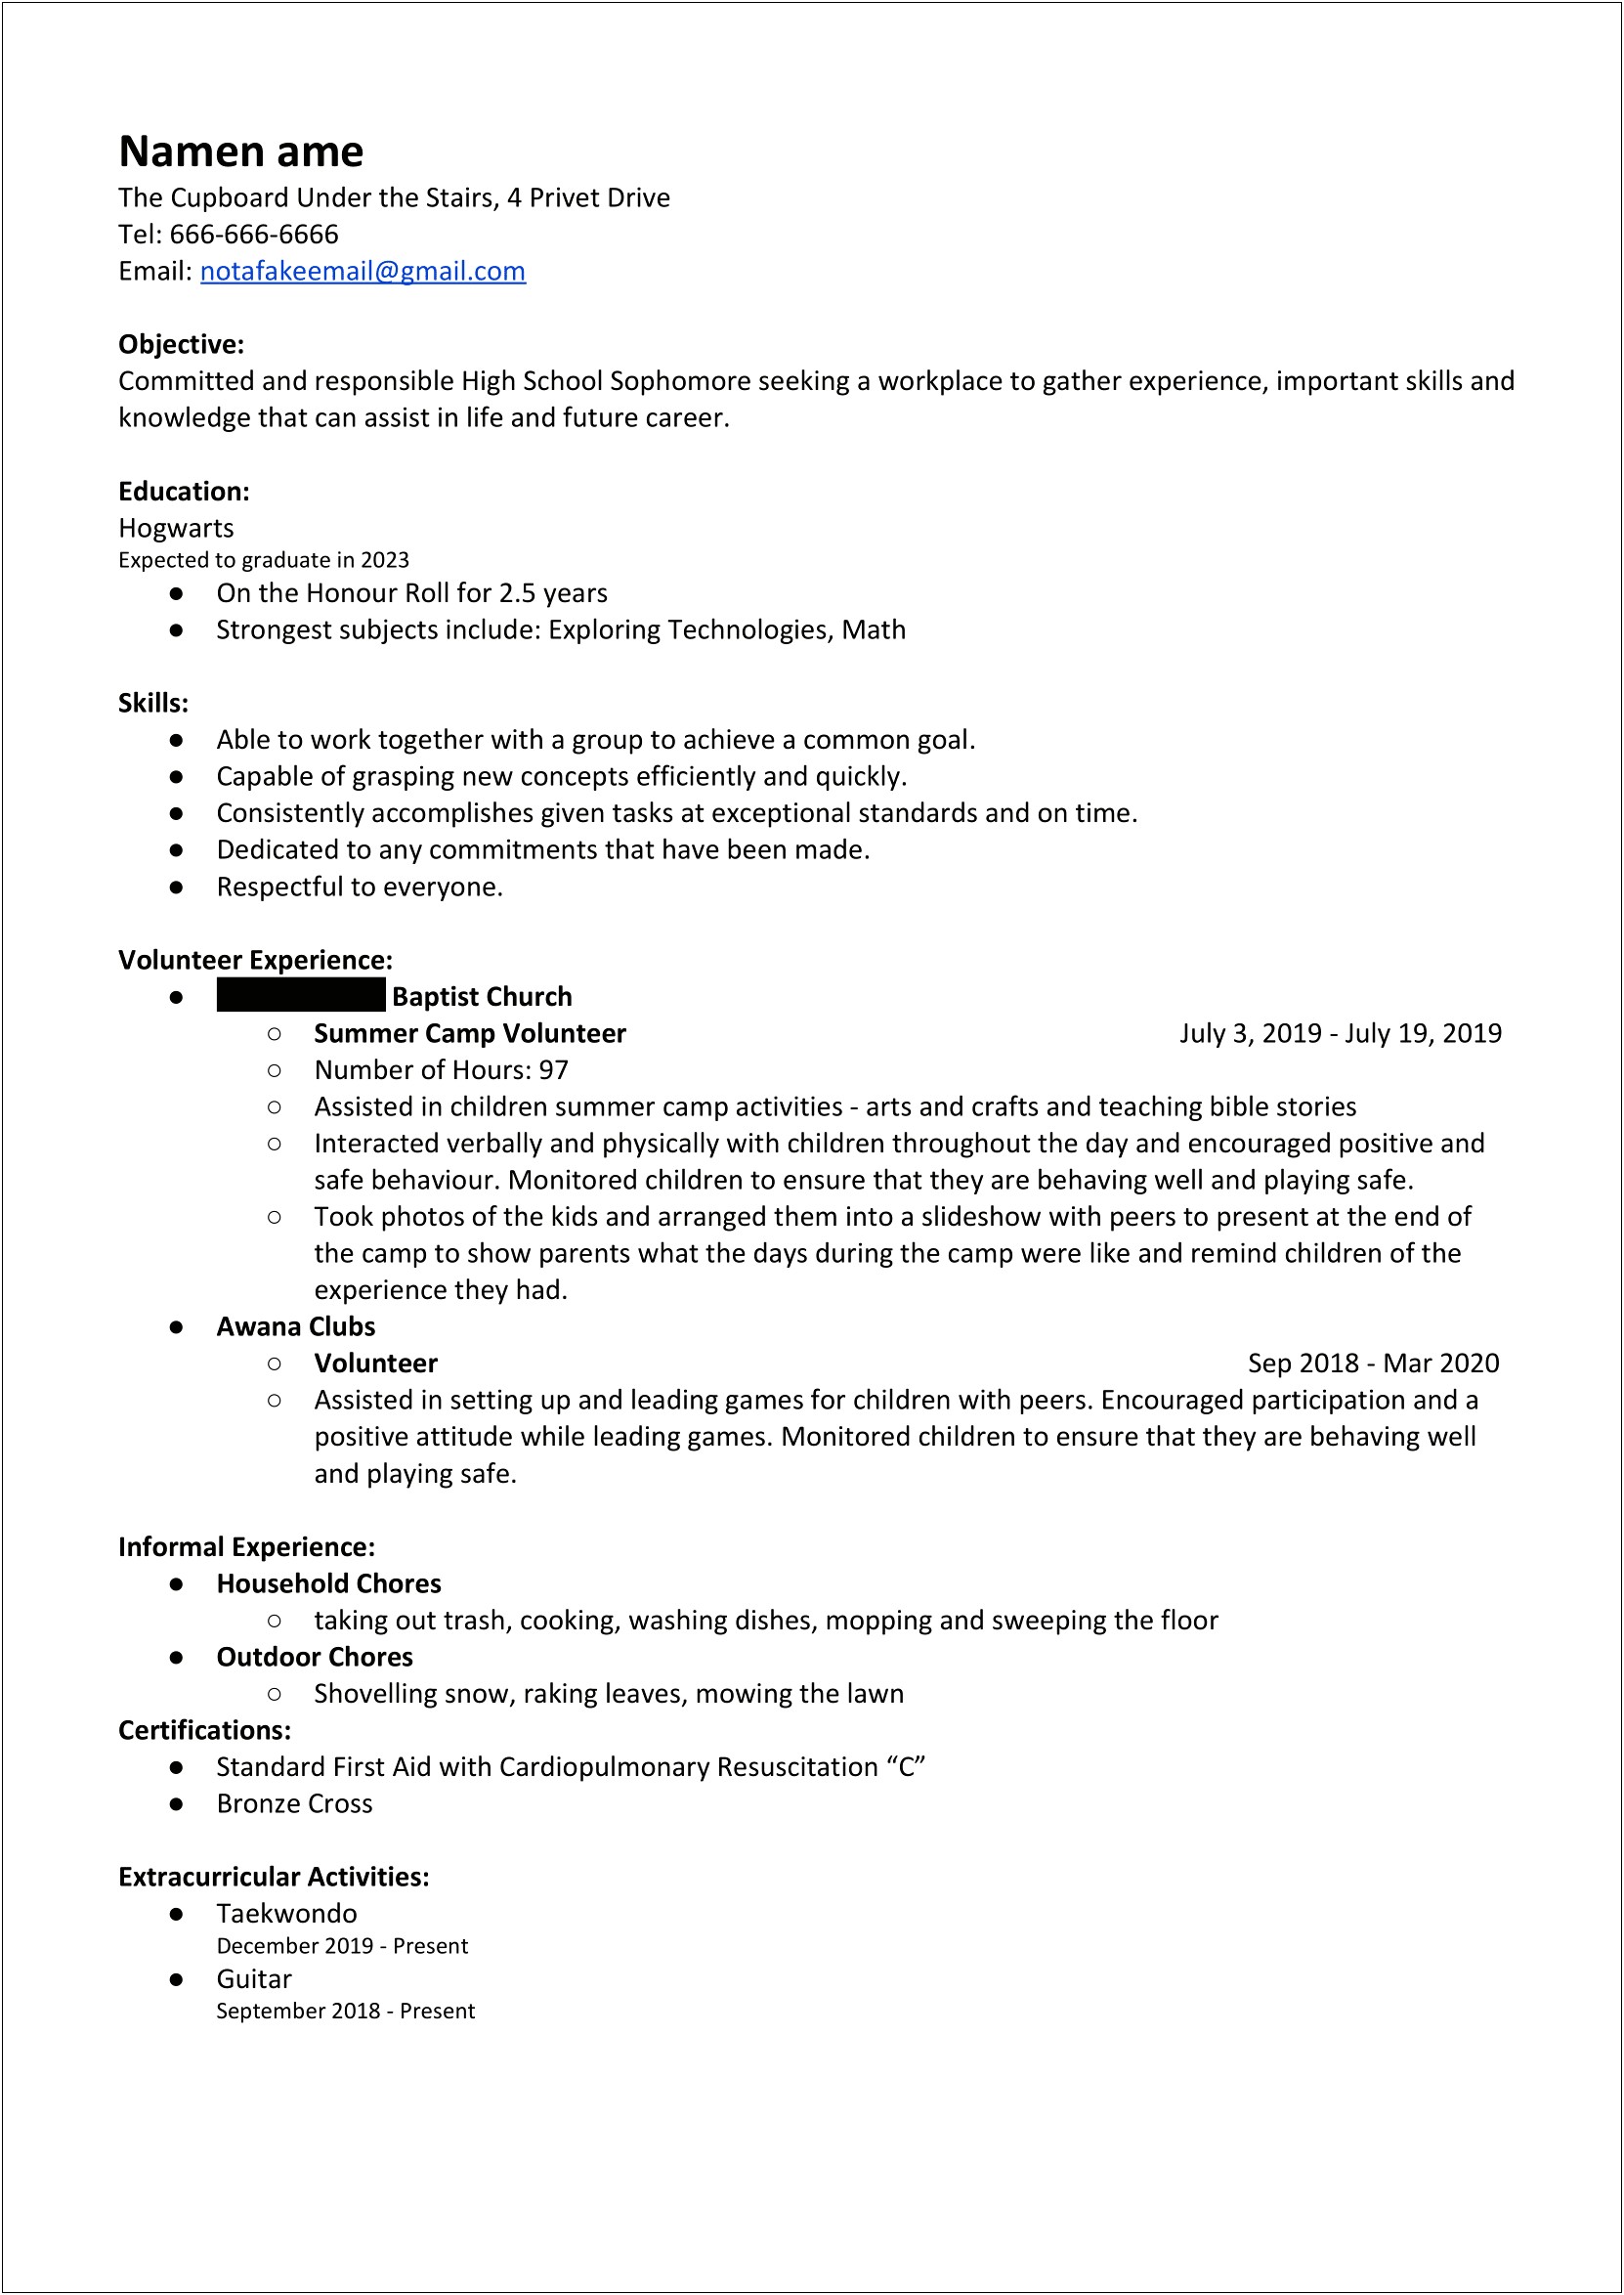 Resume Education Work Experience First Cdc